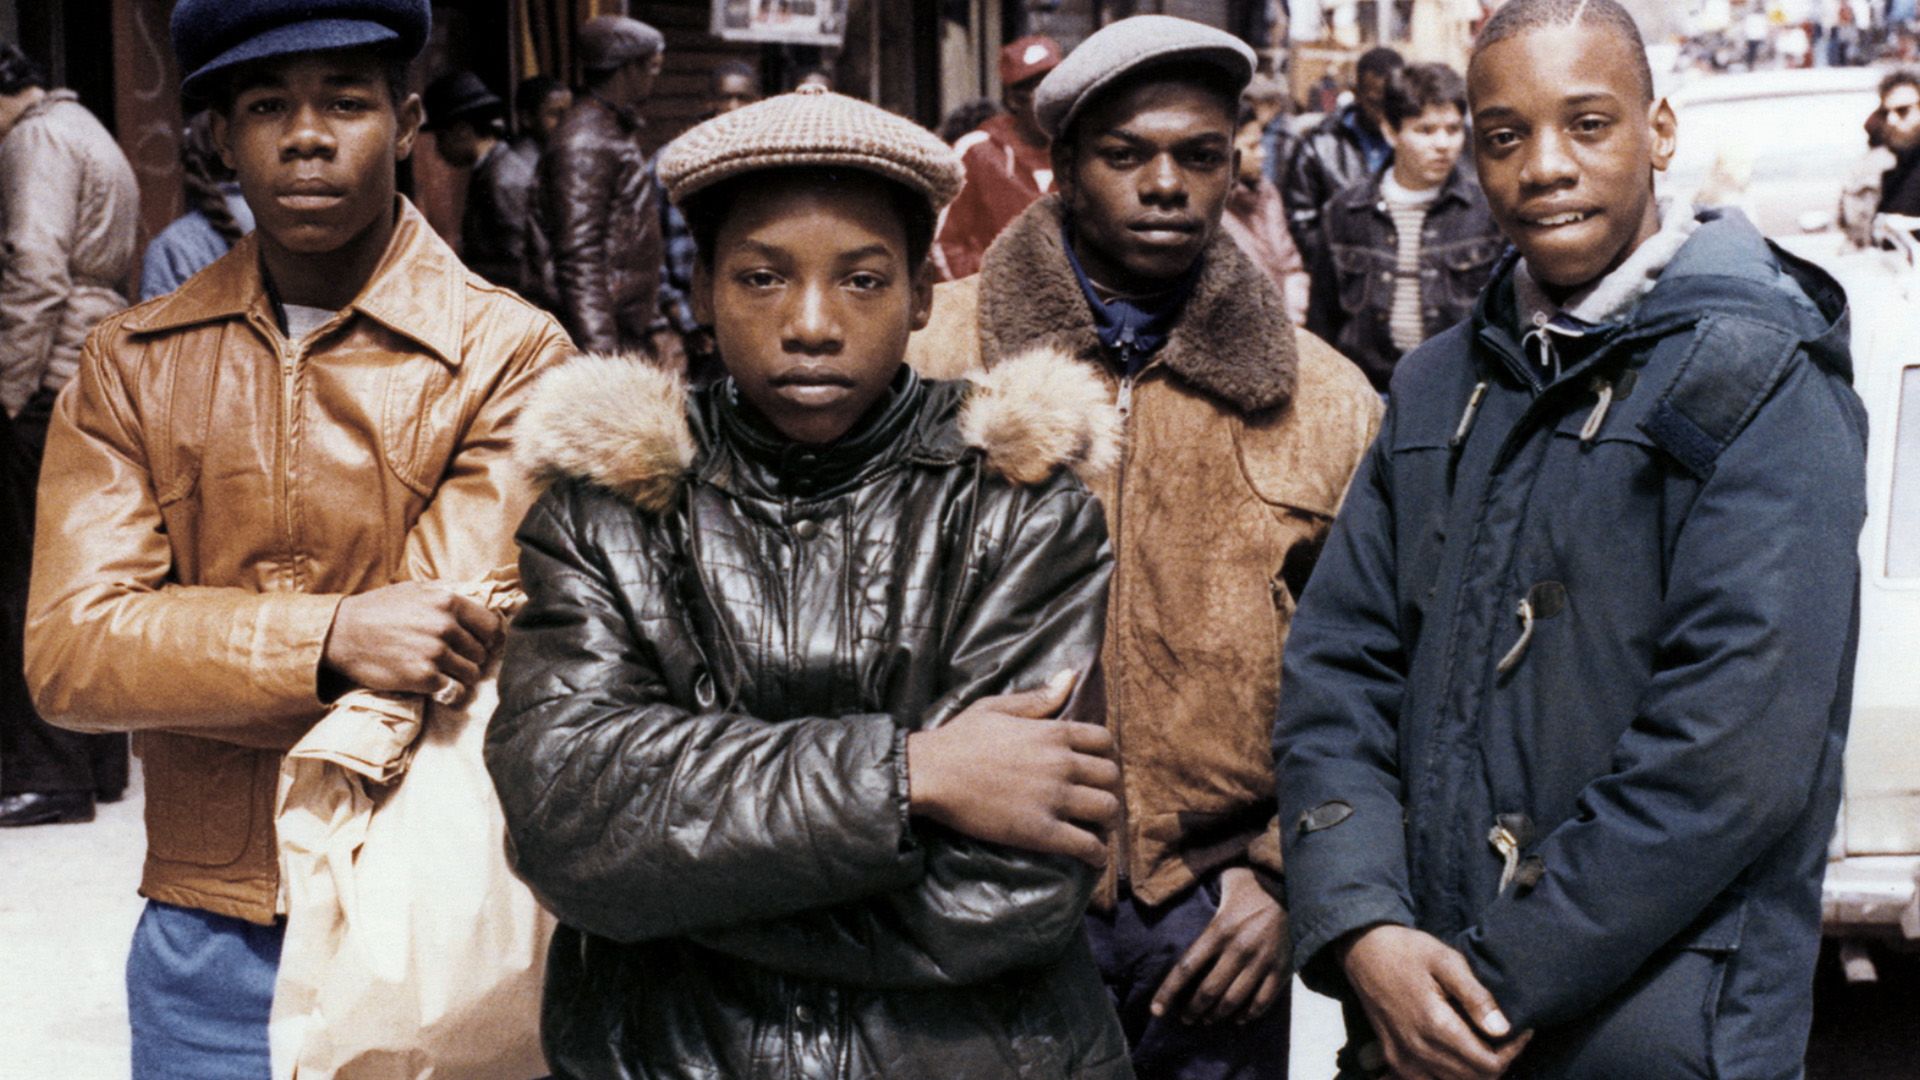 So fresh and so clean: a brief history of fashion and hip-hop